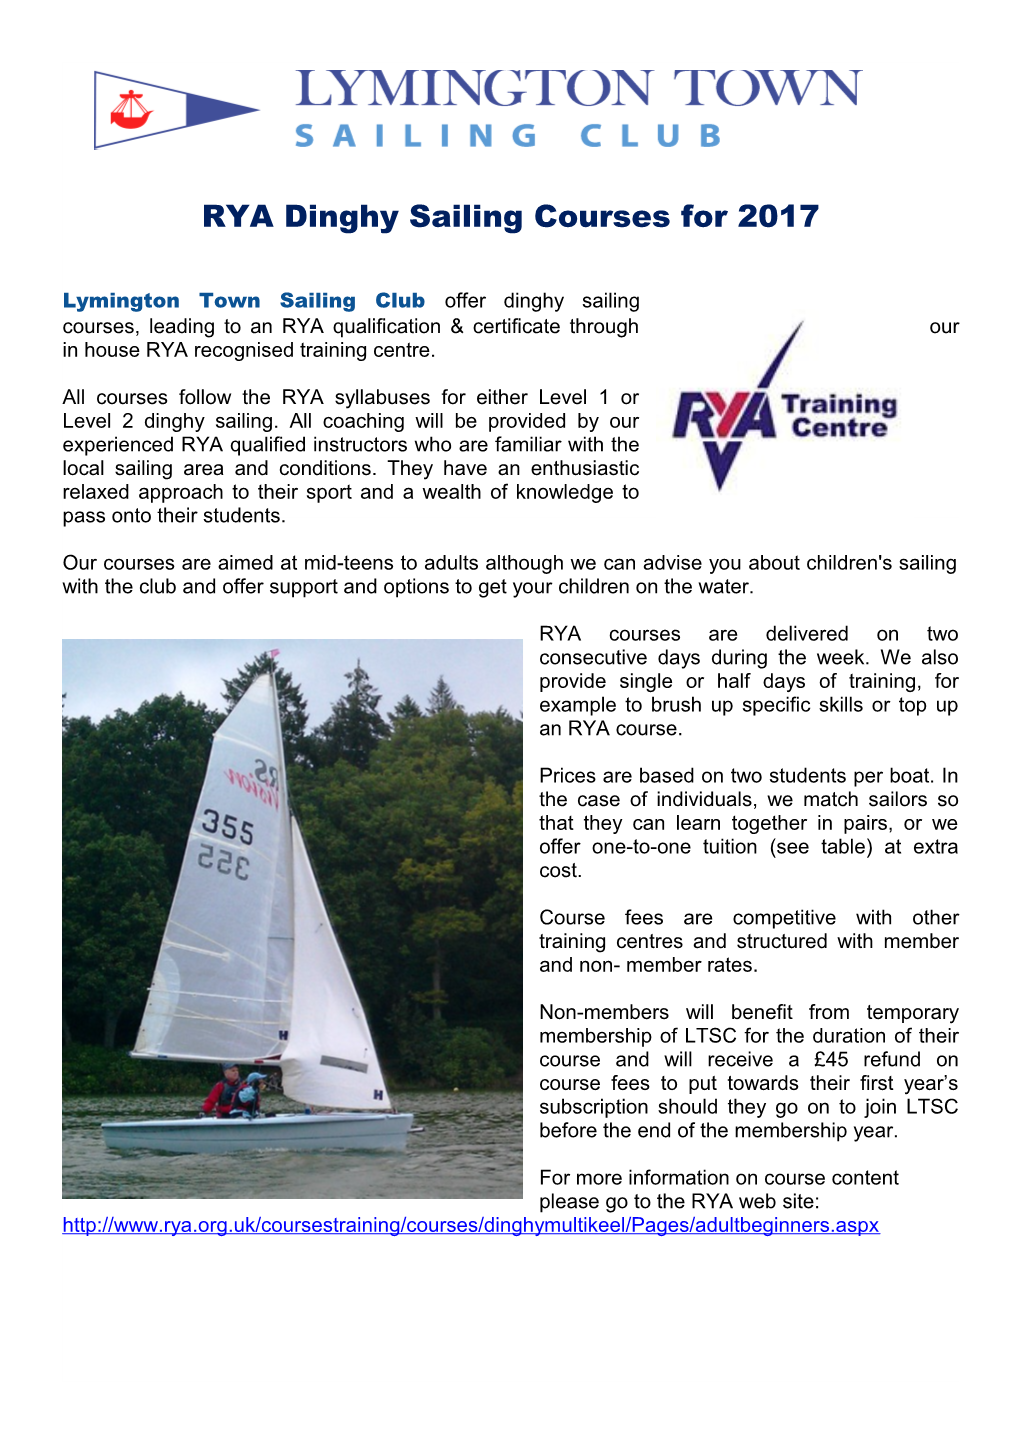 RYA Dinghy Sailing Courses for 2017